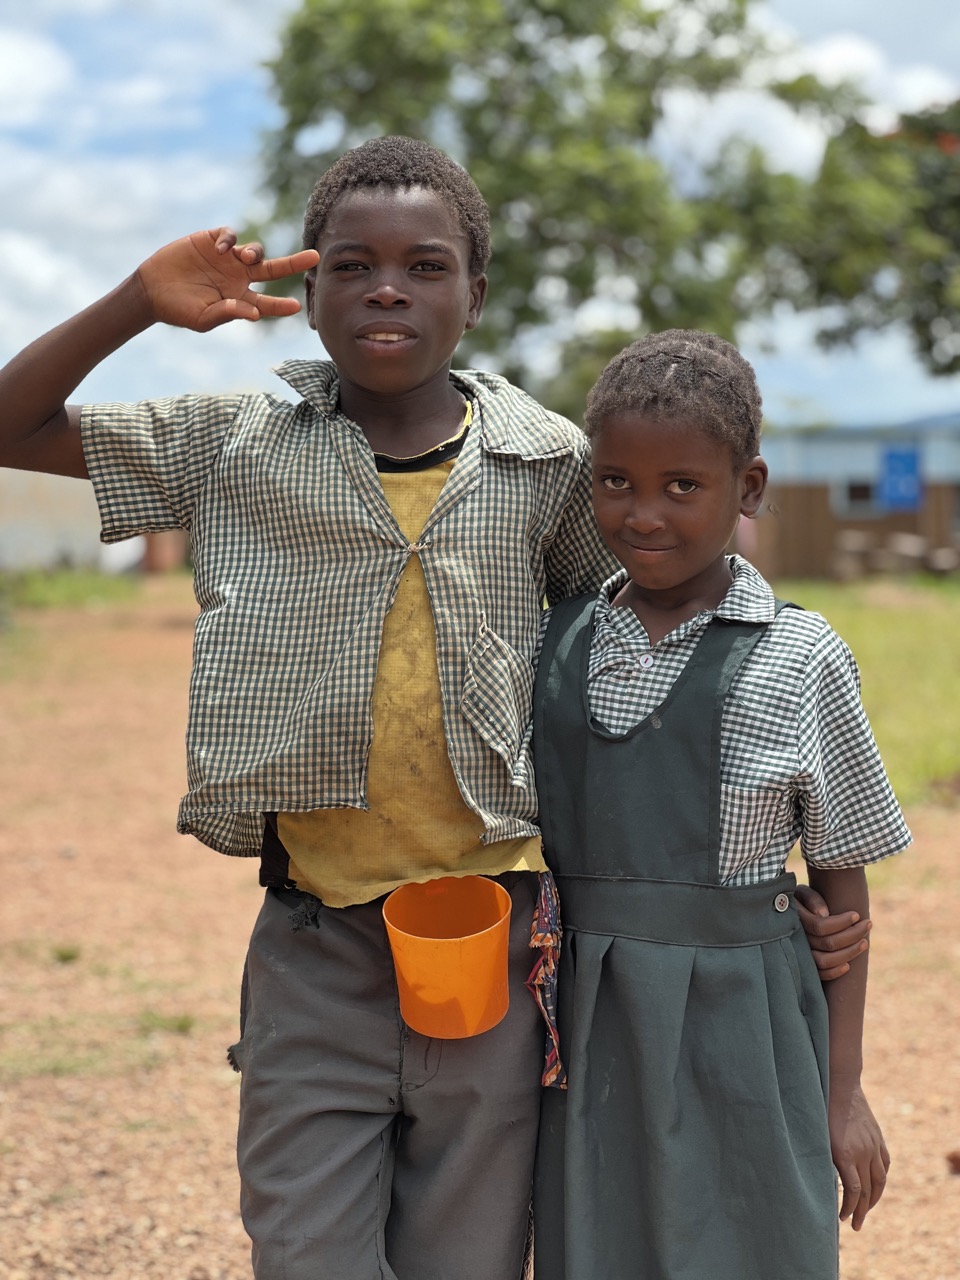 osmows hope fund initiative helping children in places of learning in Zambia